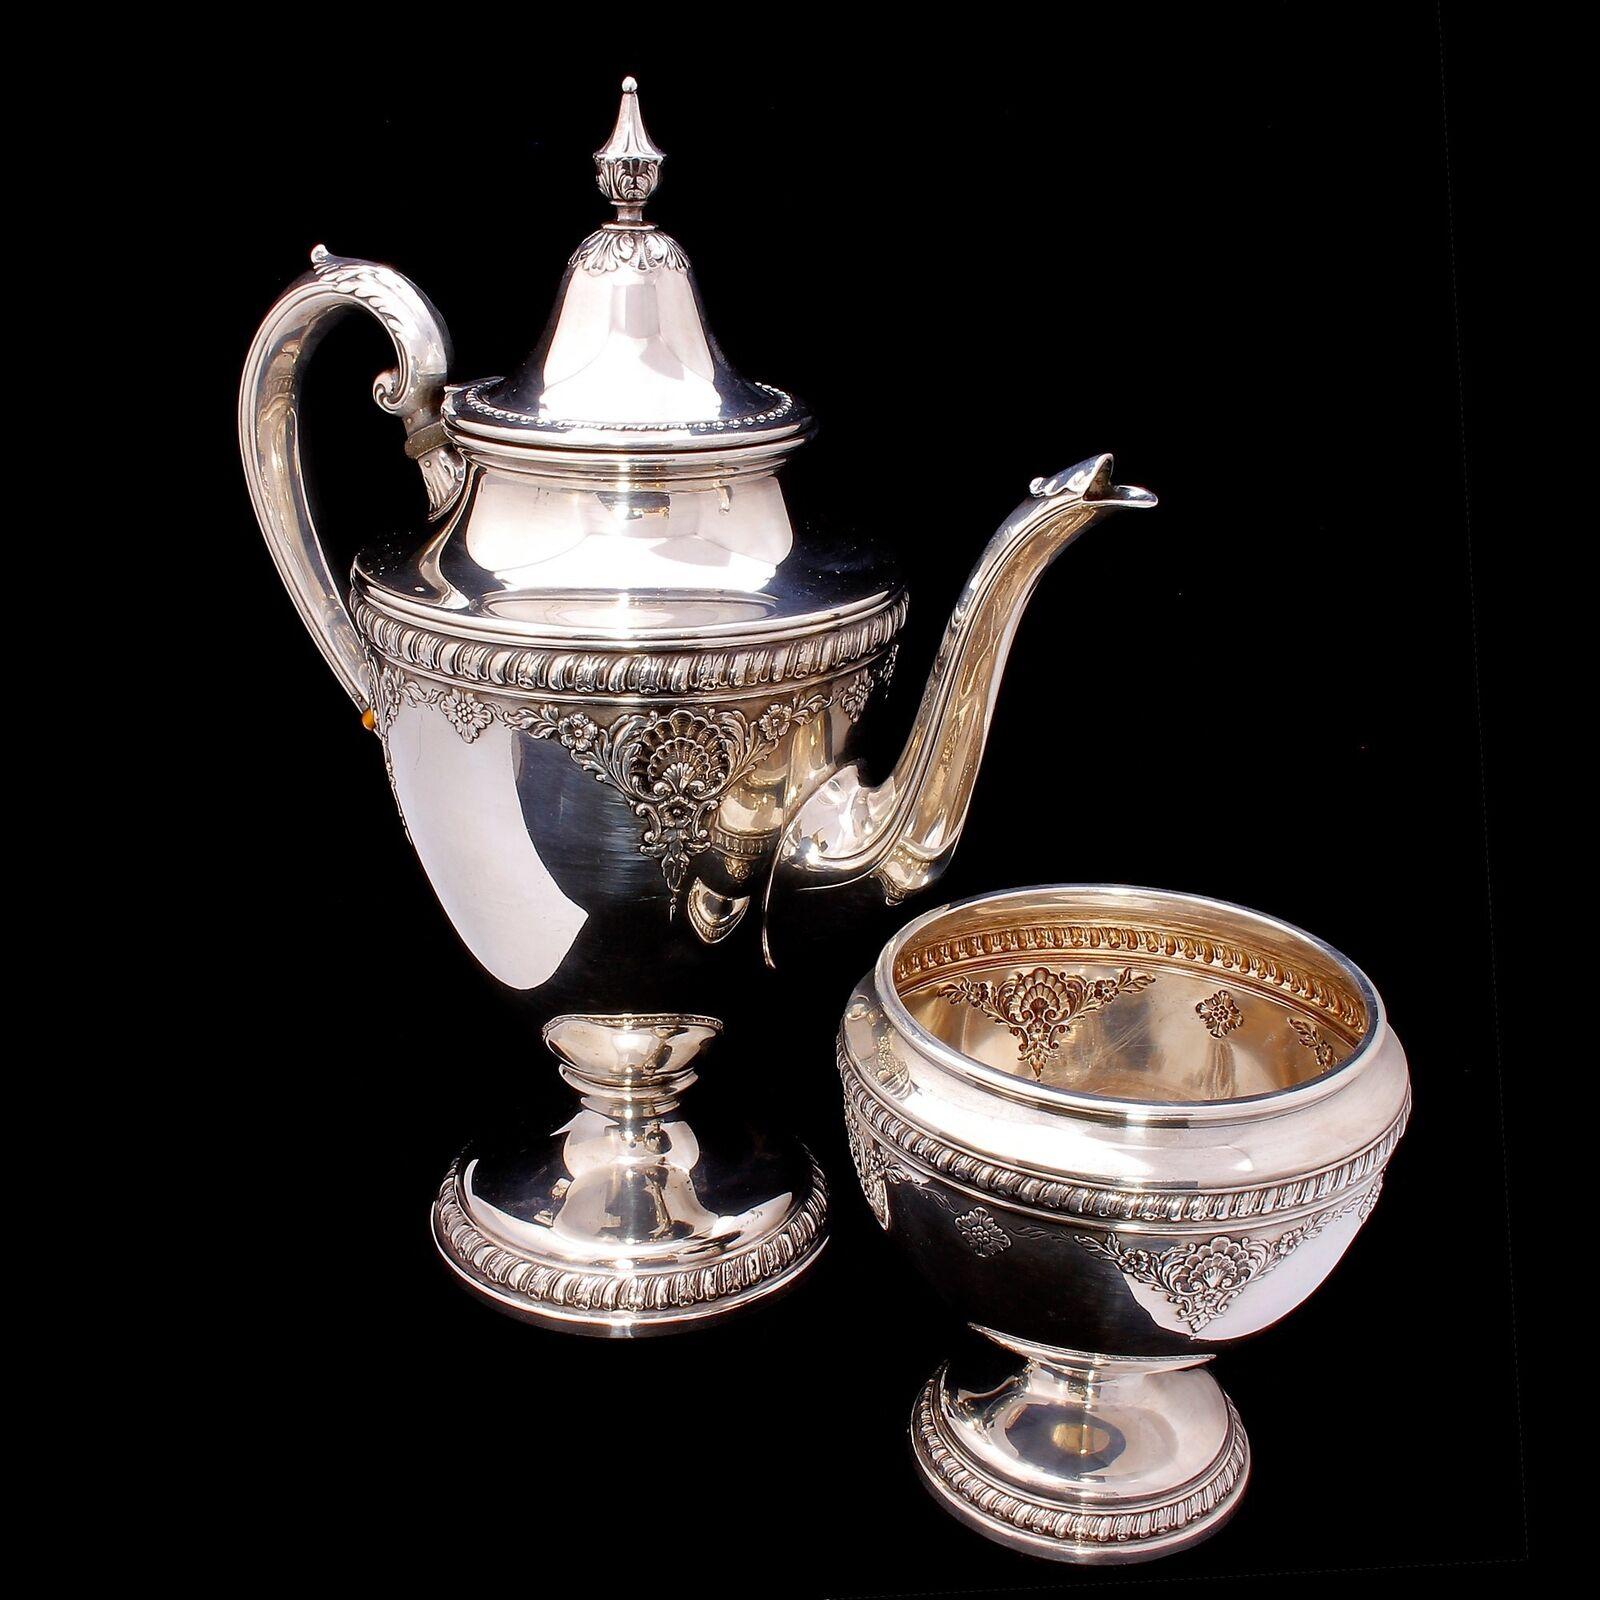 RARE Wallace Sir Christopher Sterling Silver 5 piece Coffee/Tea Set #4050

The rare and highly desirable Wallace Sir Christopher pattern sterling silver 5 piece coffee/tea set consisting of a coffee pot, tea pot, cream jug, sugar bowl with cover and